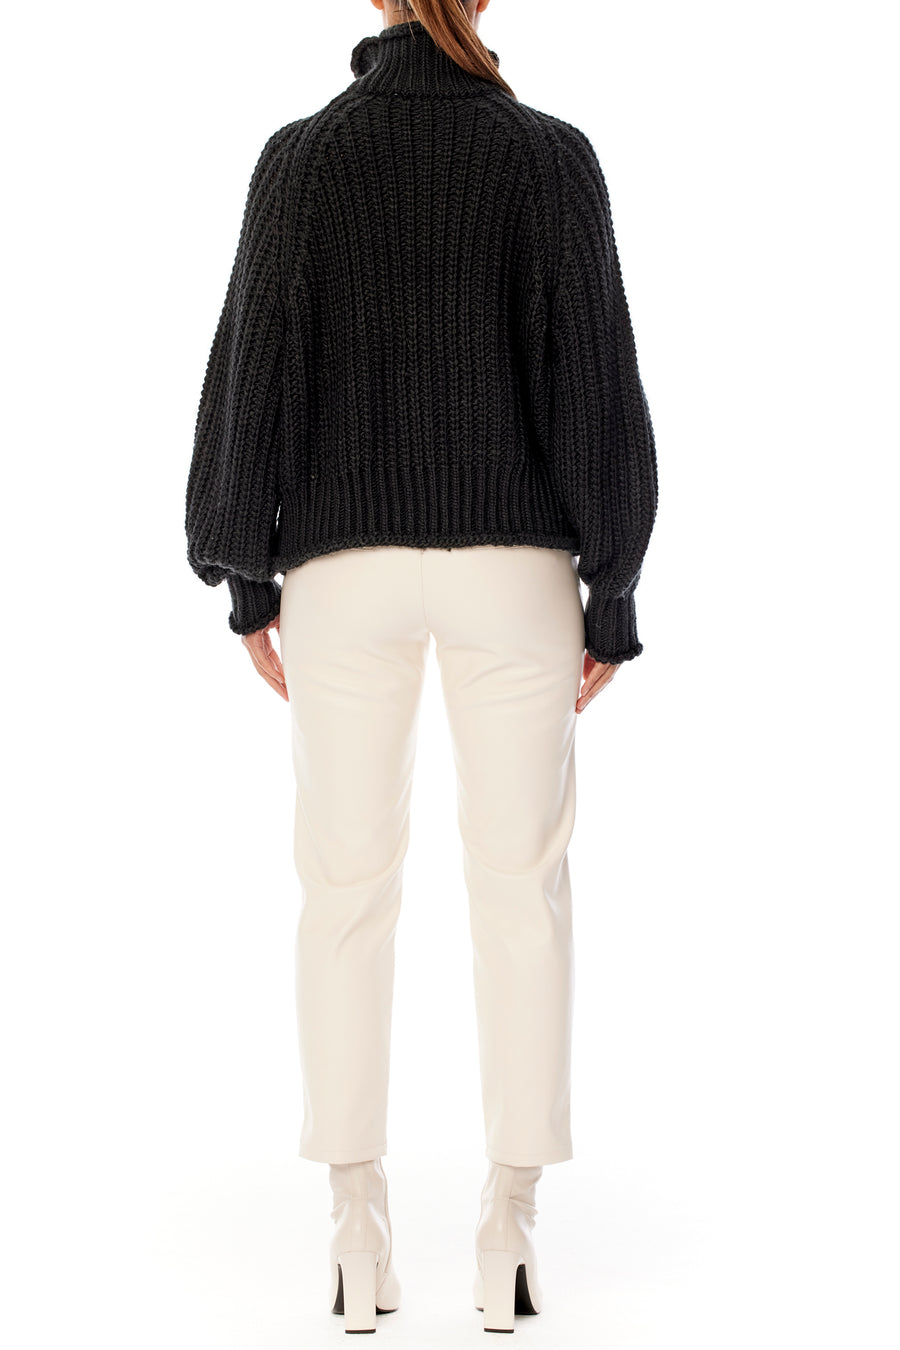 ribbed, chunky knit turtleneck sweater featuring slight balloon sleeves and a funnel neck in black